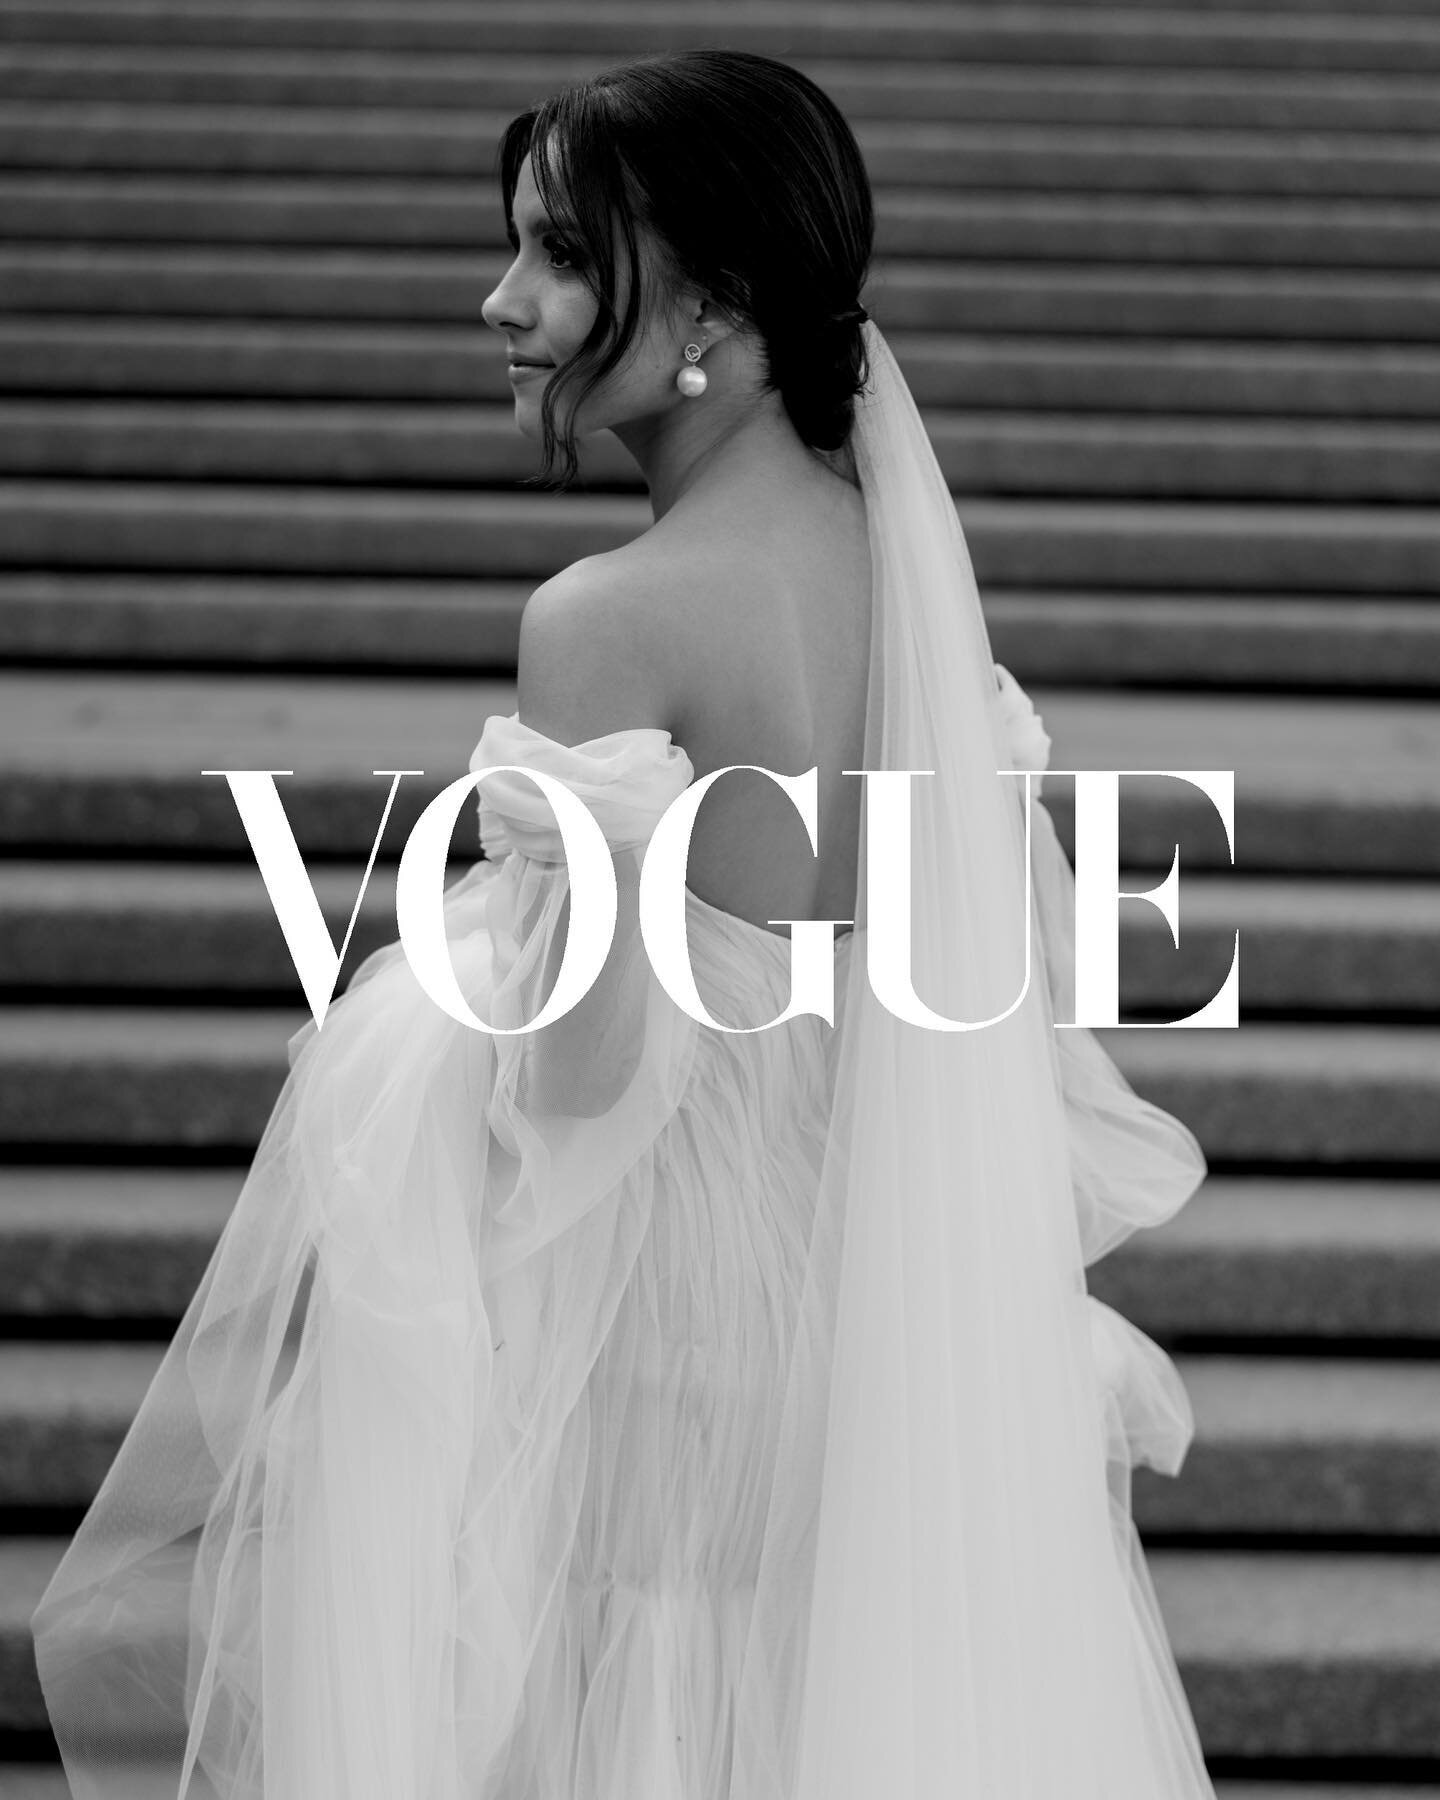 FEATURED IN VOGUE. 

We have been featured in &amp; recommend by @britishvogue in their November issue for &ldquo;A very Vogue wedding&rdquo; 

Thank you for the honour Vogue, so proud of our studio 🖤
#featuredinvogue #voguemagazine #britishvogue #m